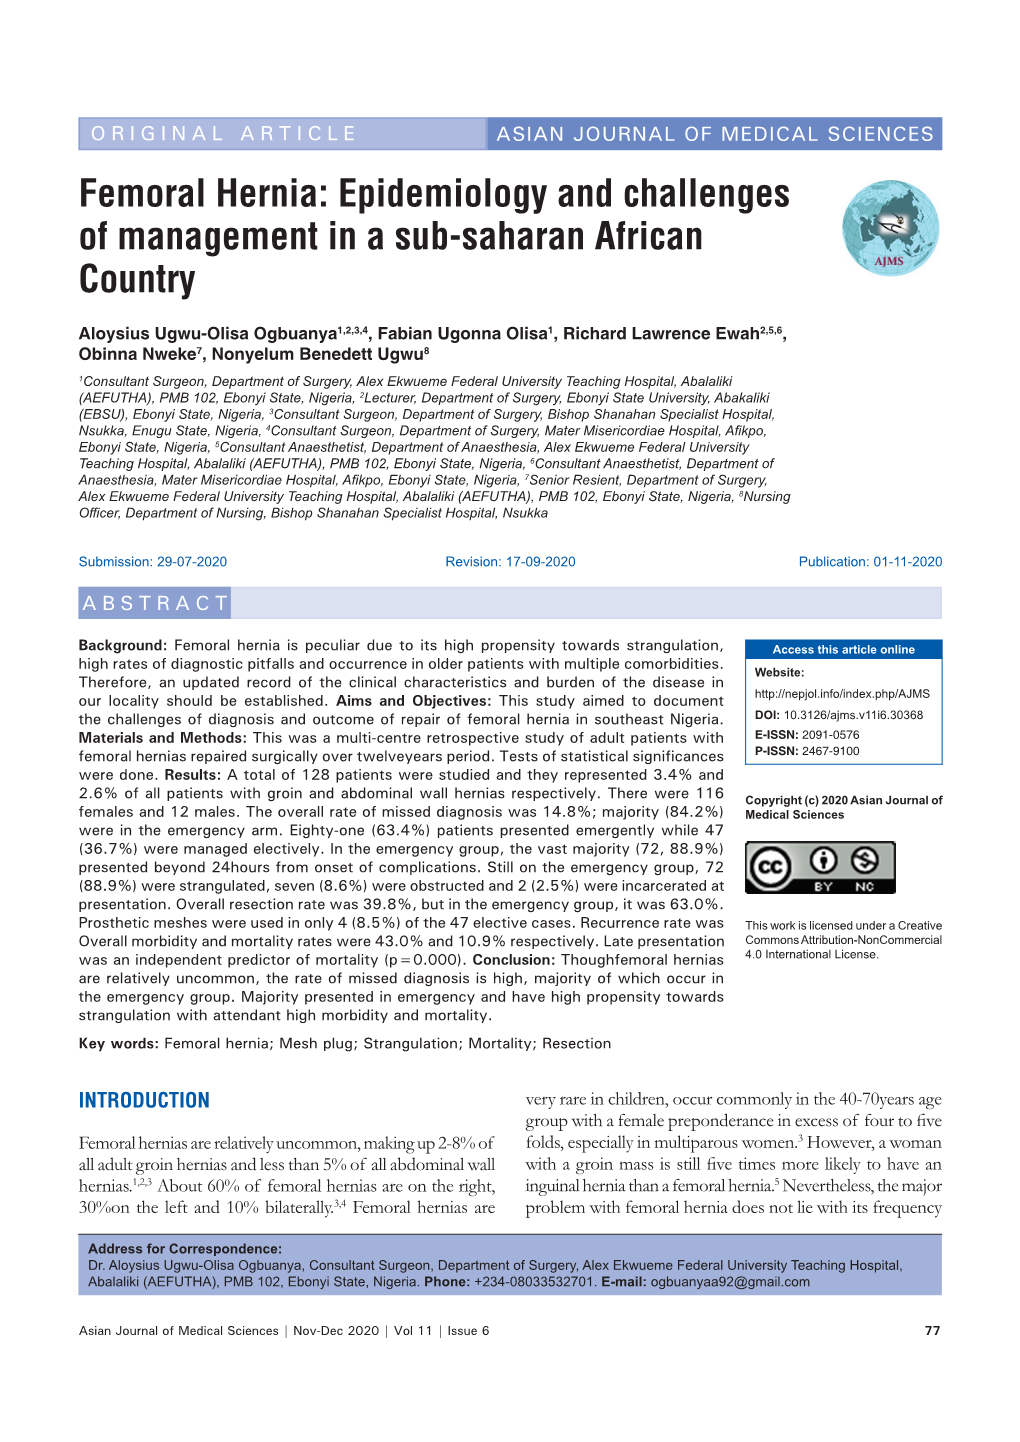 Femoral Hernia: Epidemiology and Challenges of Management in a Sub-Saharan African Country